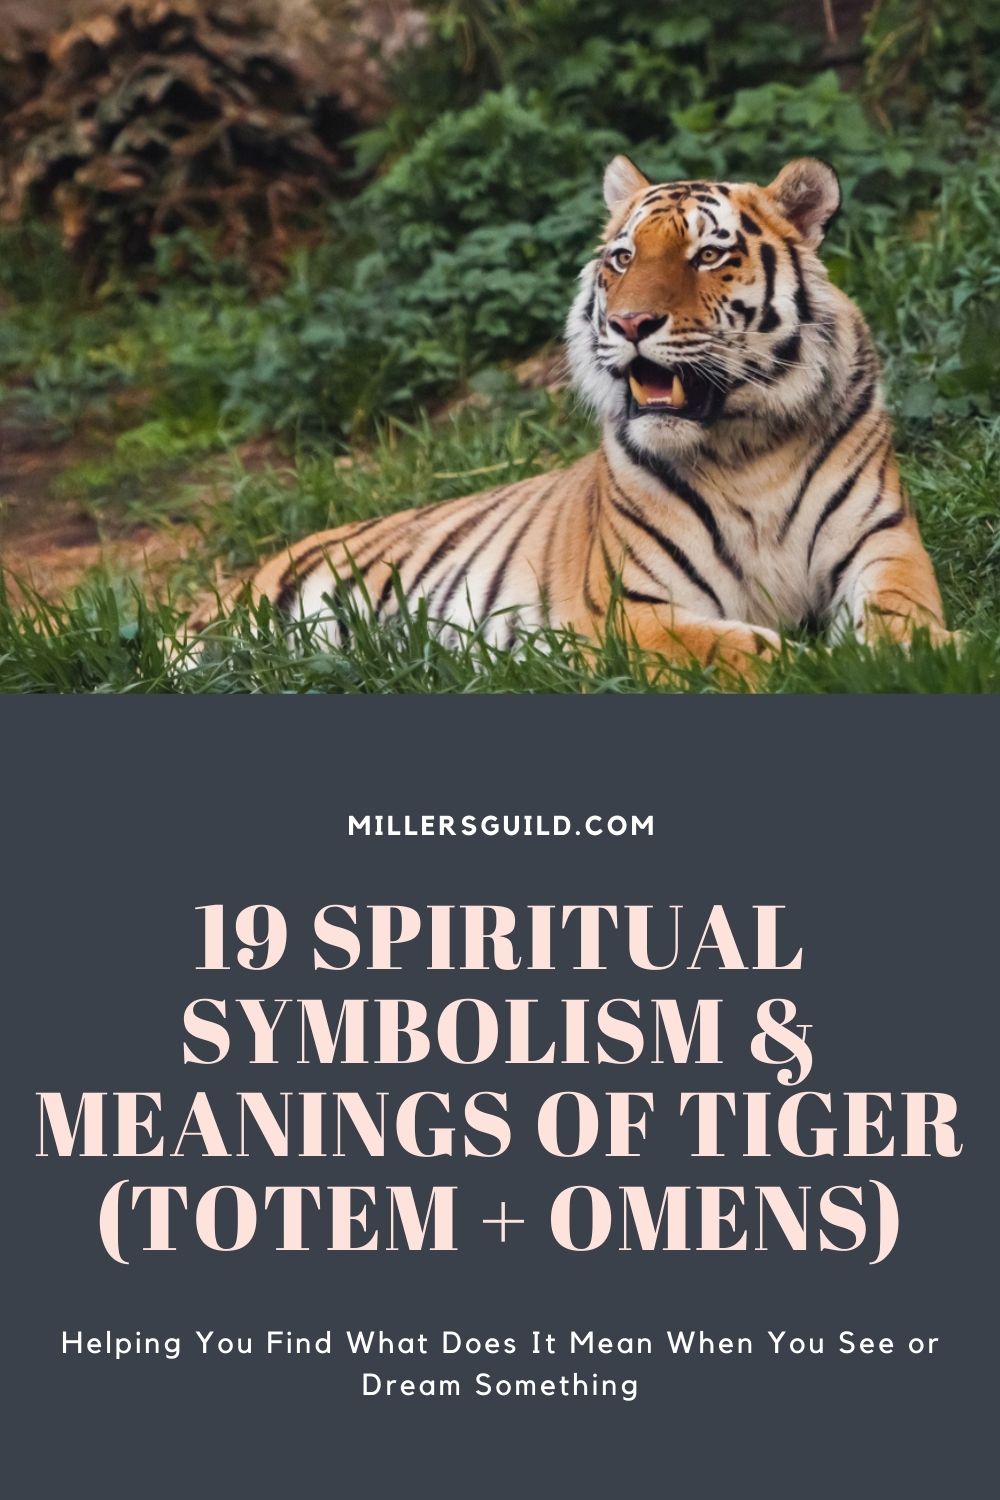 19 Spiritual Symbolism & Meanings of Tiger (Totem + Omens) 2